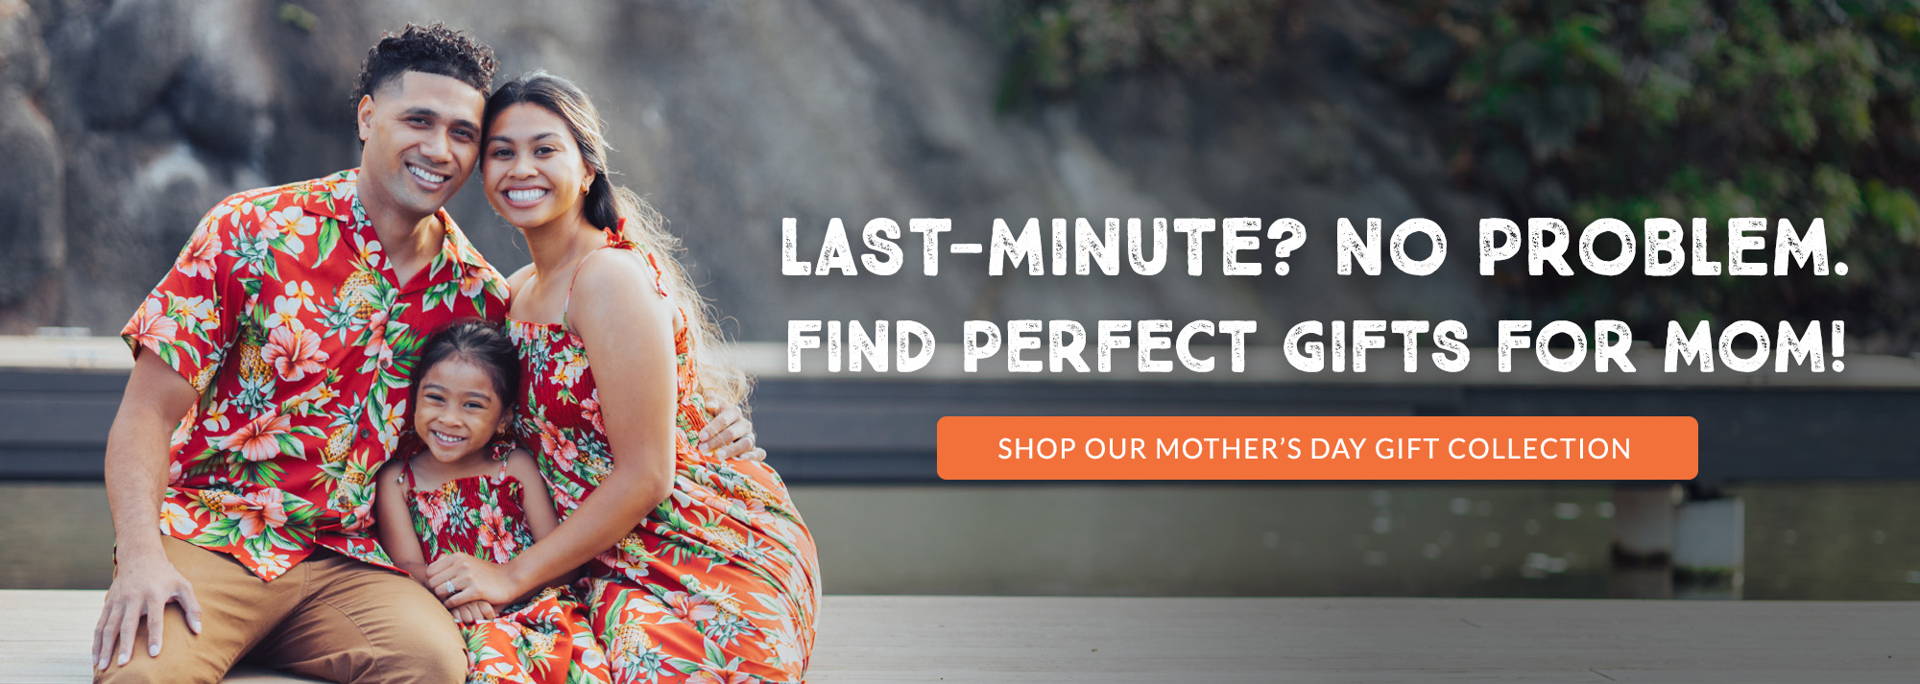 Last-minute? No problem. Find perfect gifts for Mom at the Hawaii Store!